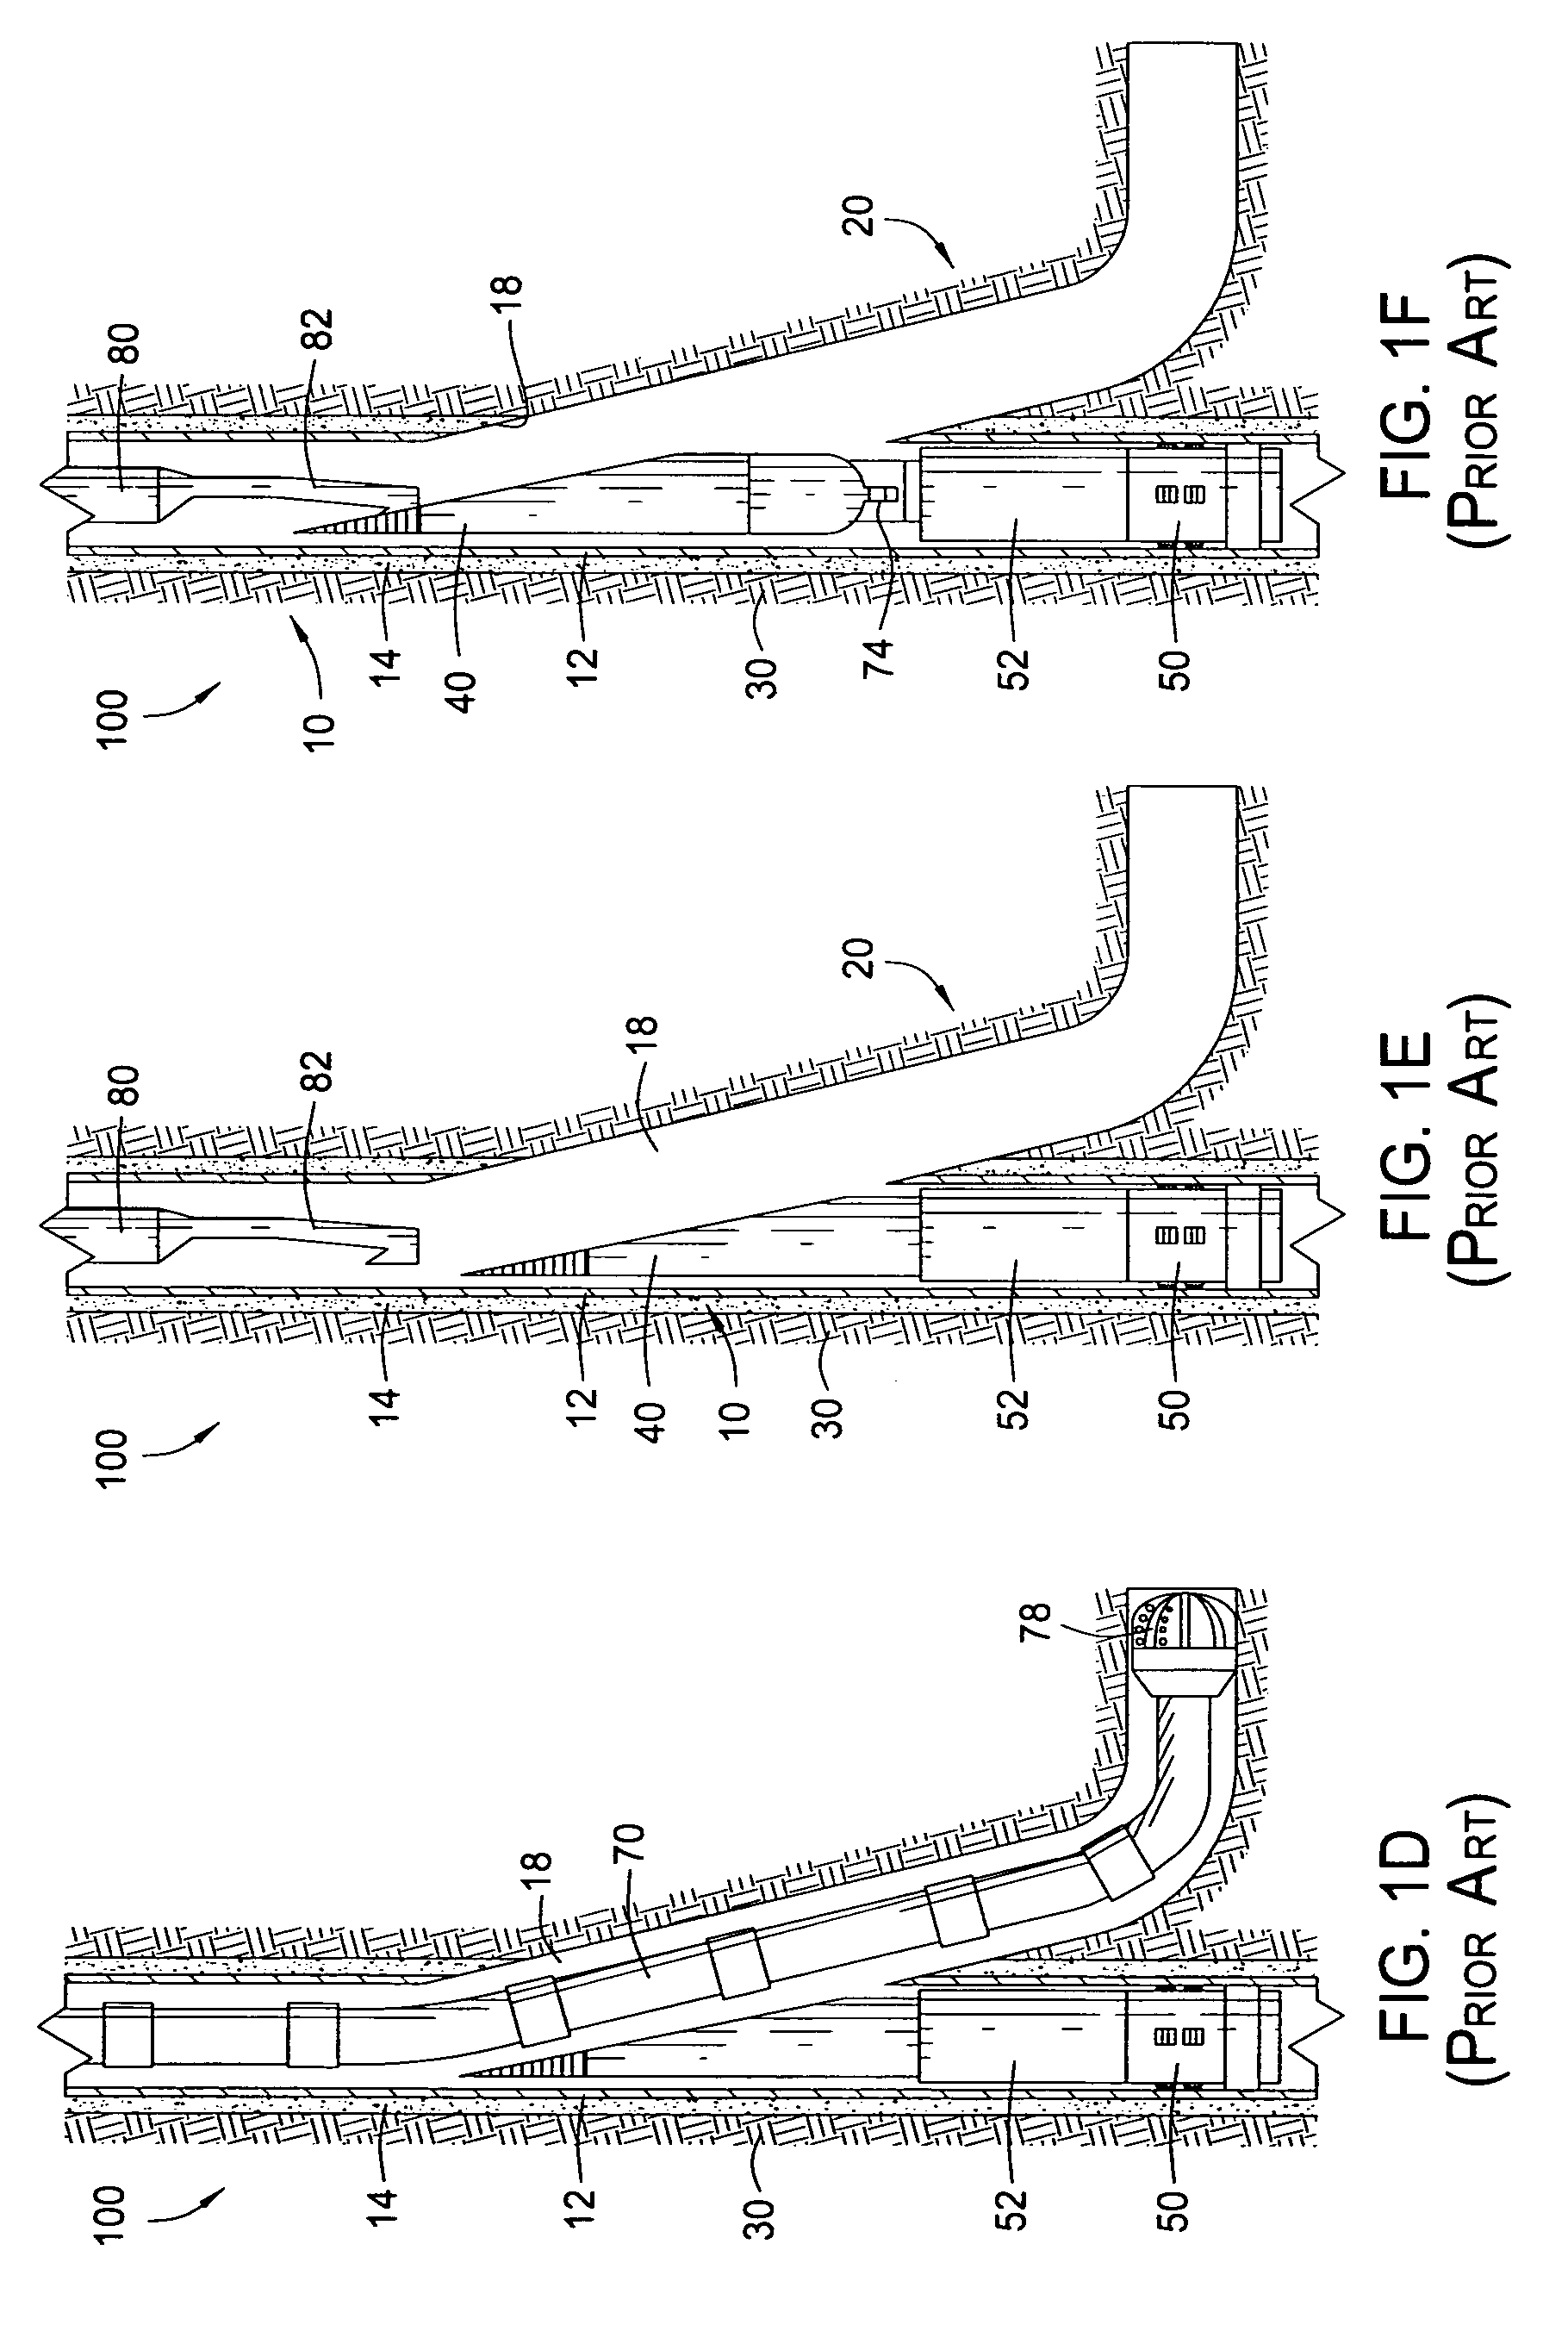 Method of developing a re-entry into a parent wellbore from a lateral wellbore, and bottom hole assembly for milling